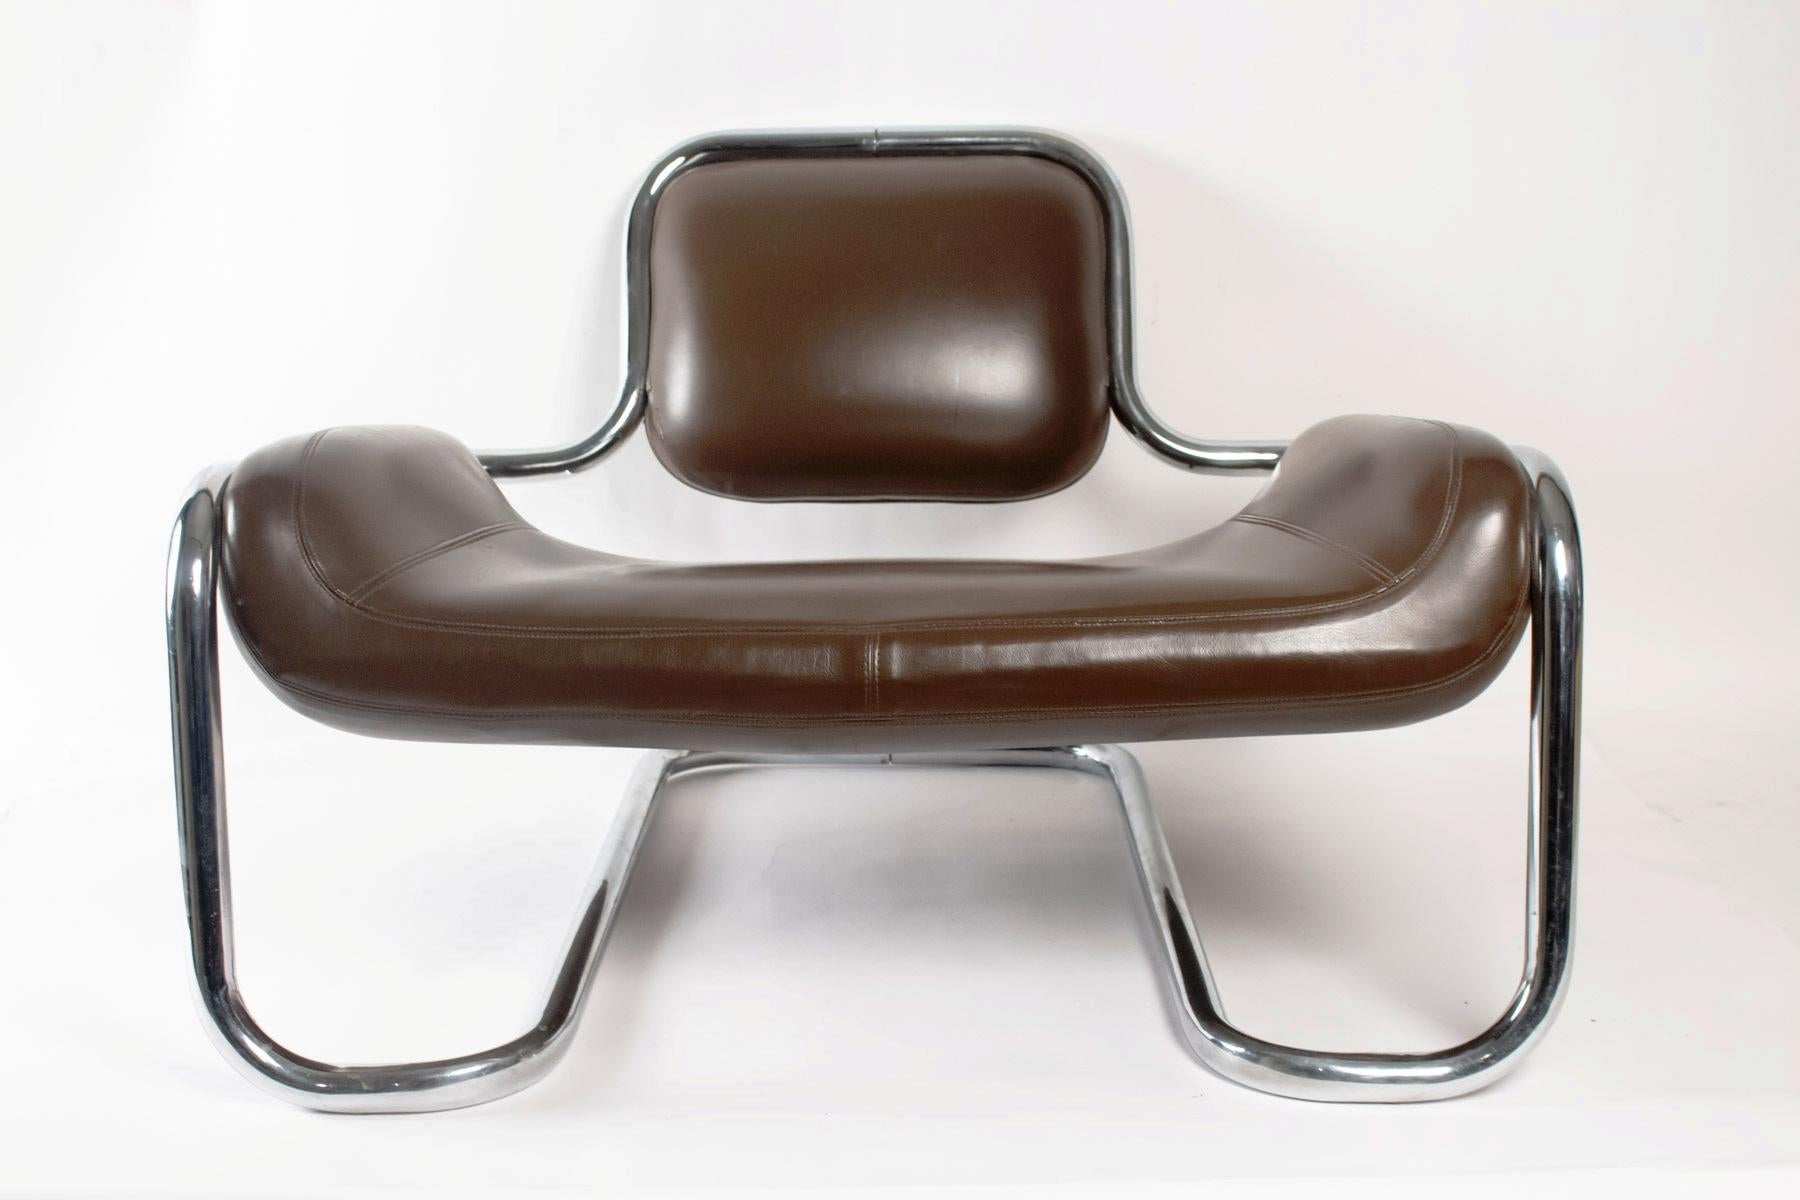 Fabulous futurist Limande armchair by Kwok Hoï Chan for  Maison Steiner, 1968, France,
Chrome and chocolate coloured skai
minor scratches.

Born in Hong Kong in 1939, Kwok Hoï Chan is an endearing figure in international design. He undertakes